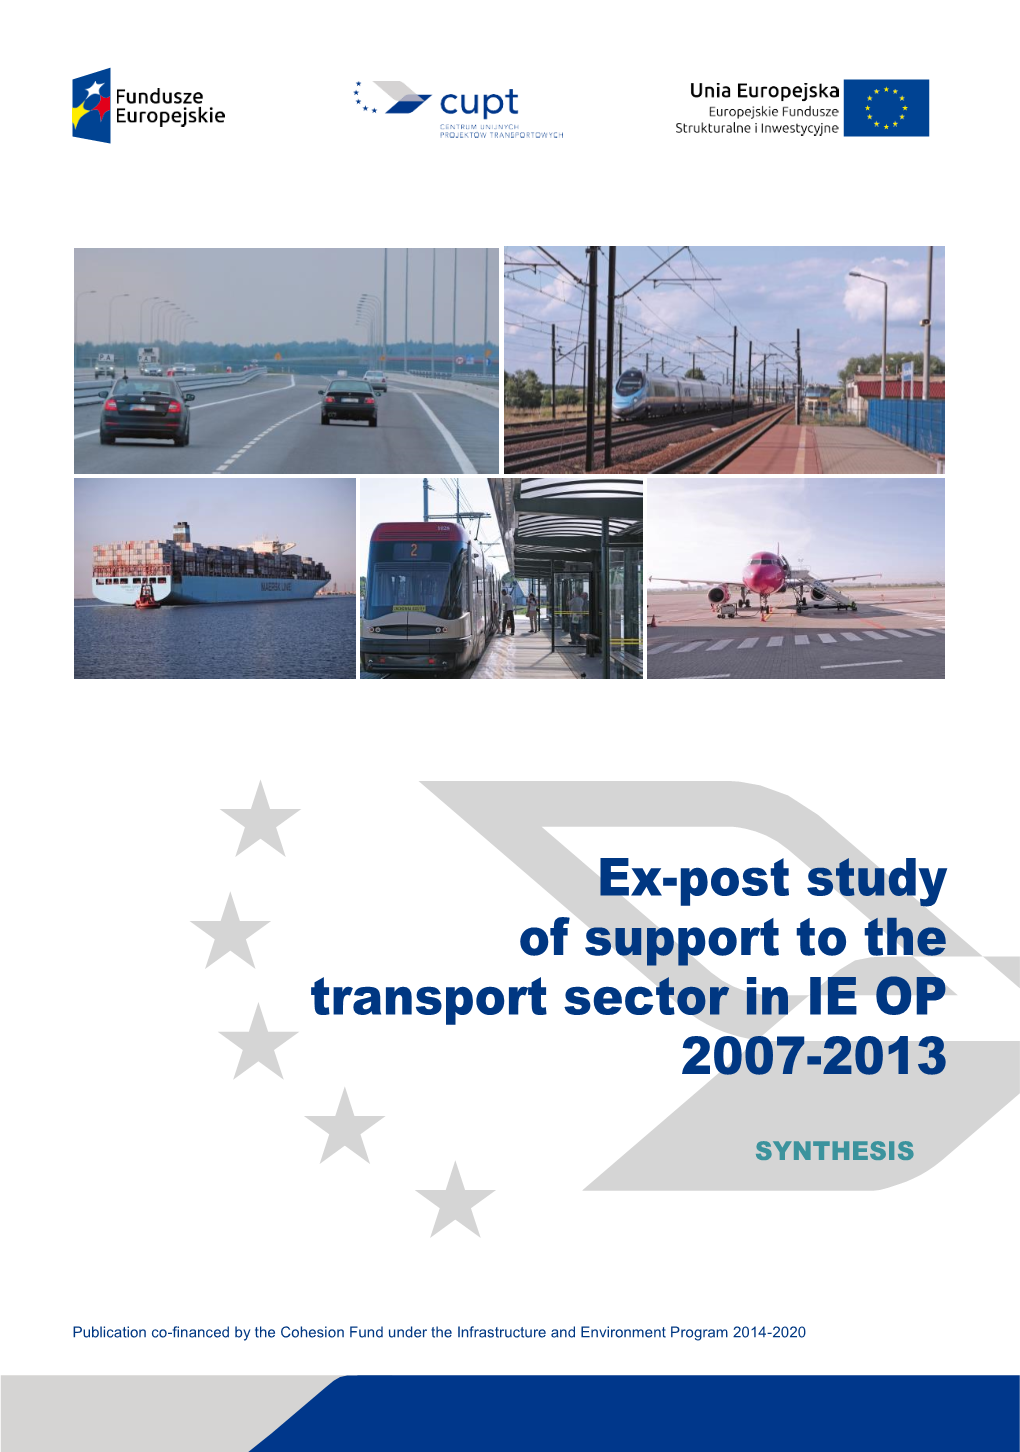 Ex-Post Study of Support to the Transport Sector in IE OP 2007-2013